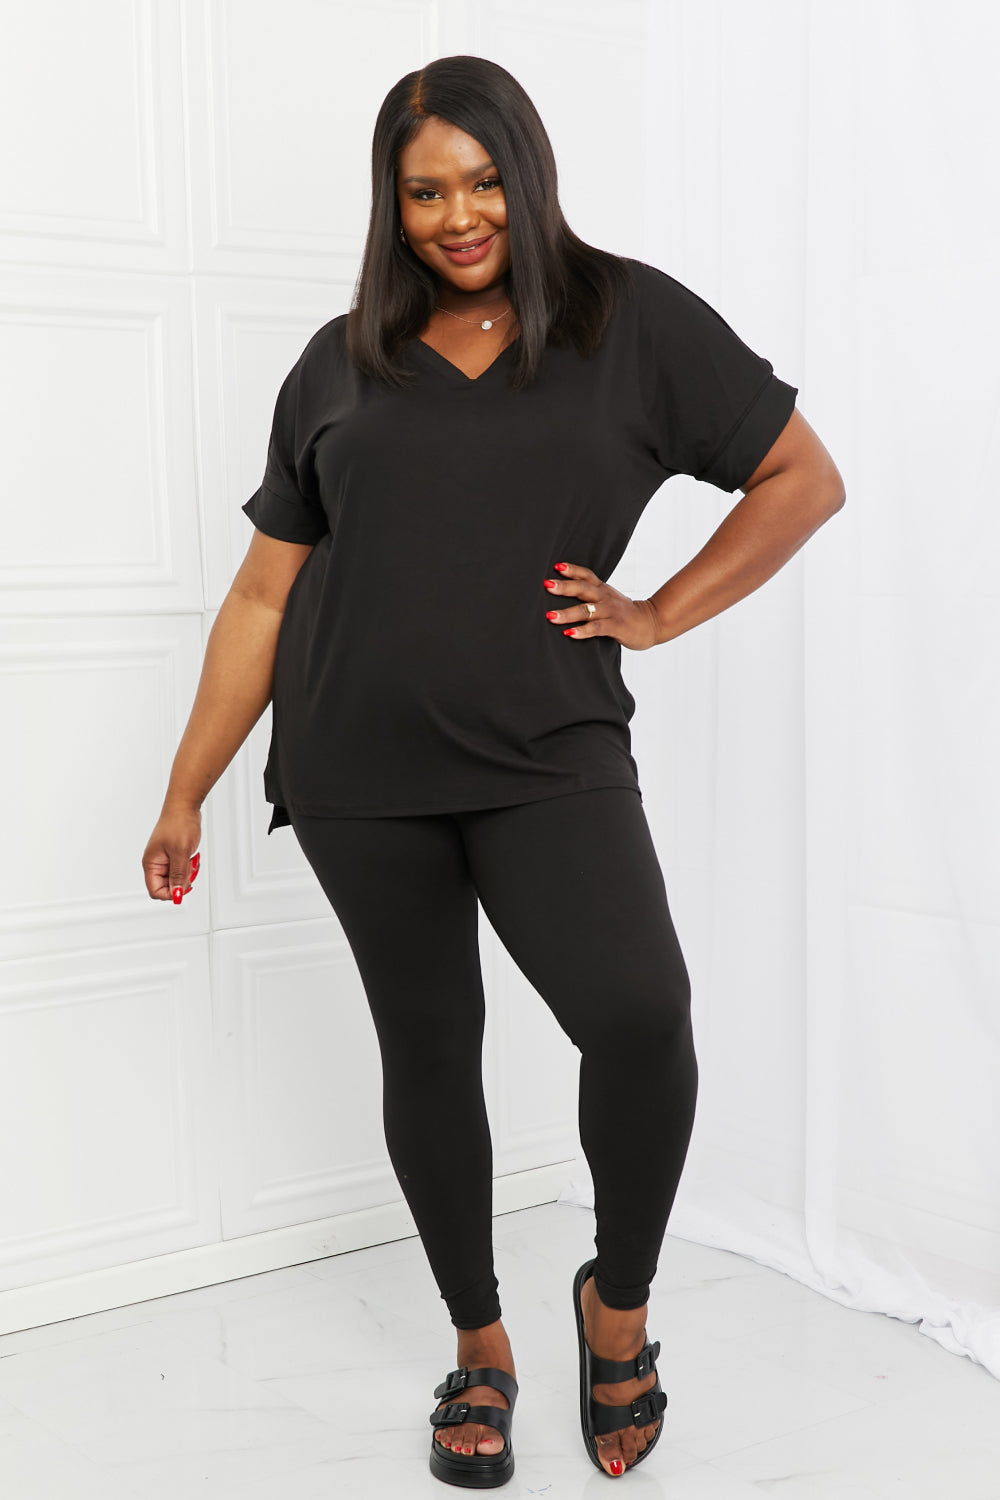 Self Love Full Size Brushed DTY Microfiber Lounge Set in Black - Black / S - Women’s Clothing & Accessories - Shirts